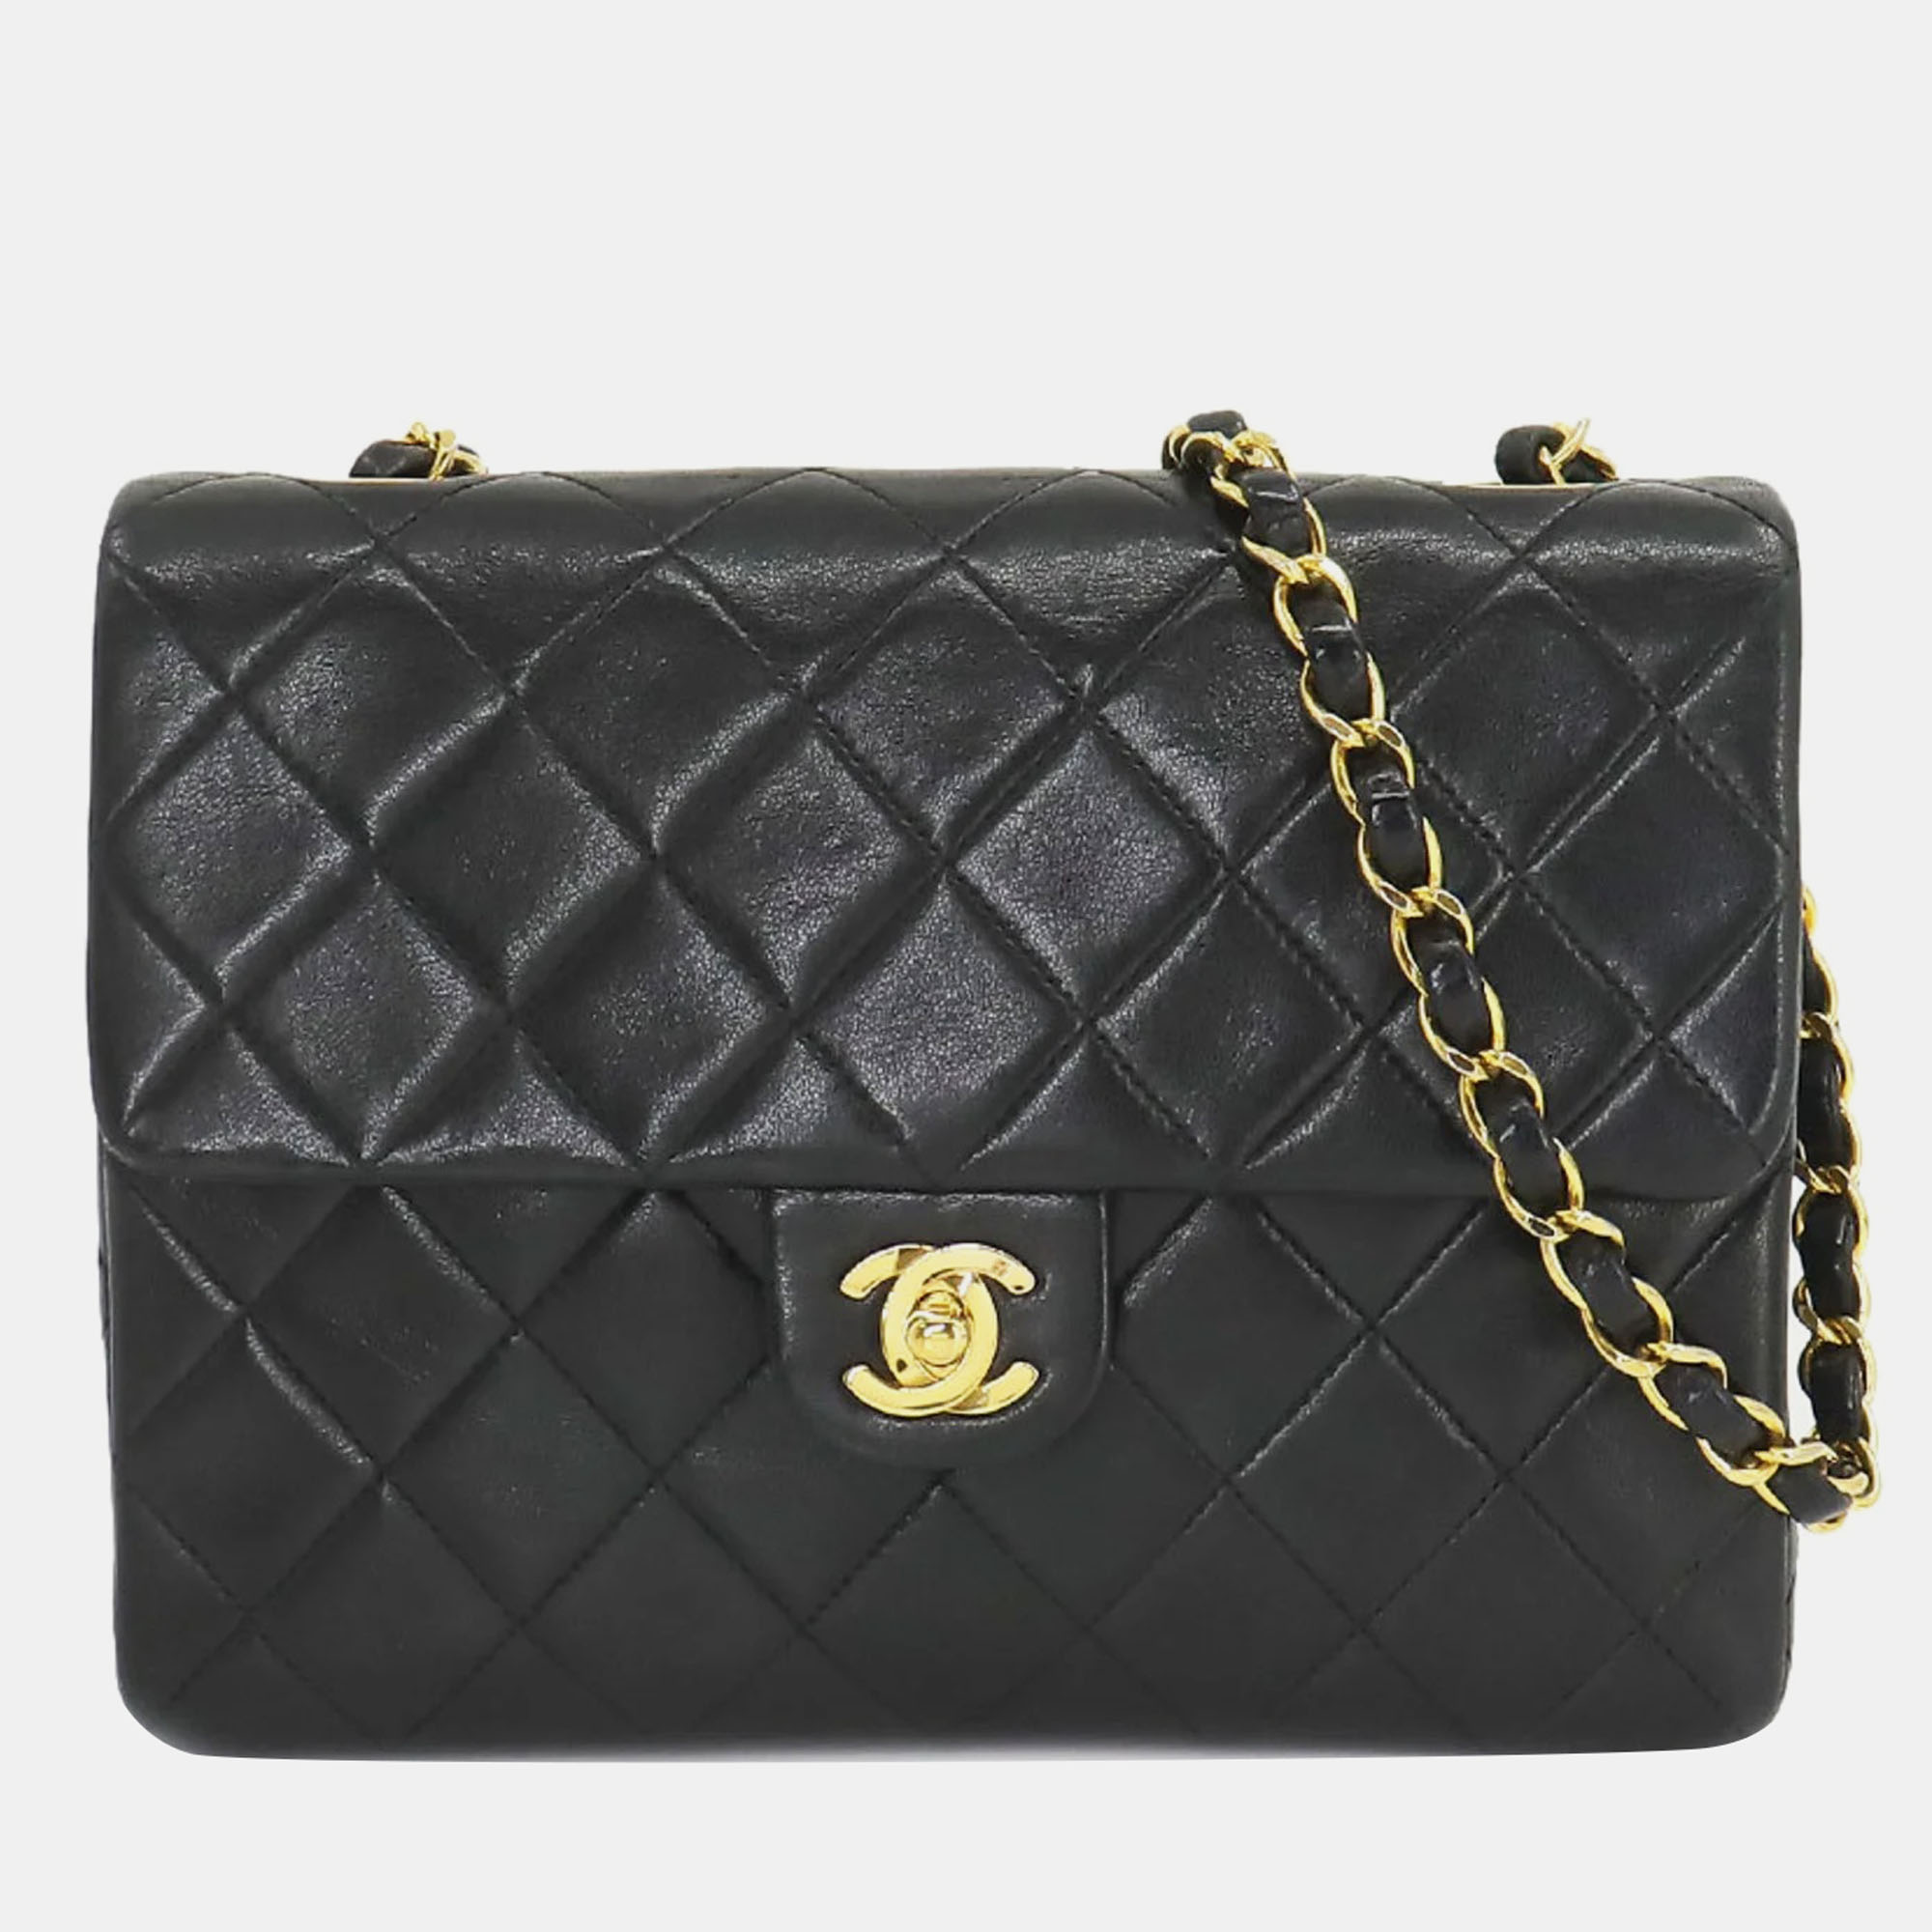 Chanel black lambskin leather small vintage classic flap bag